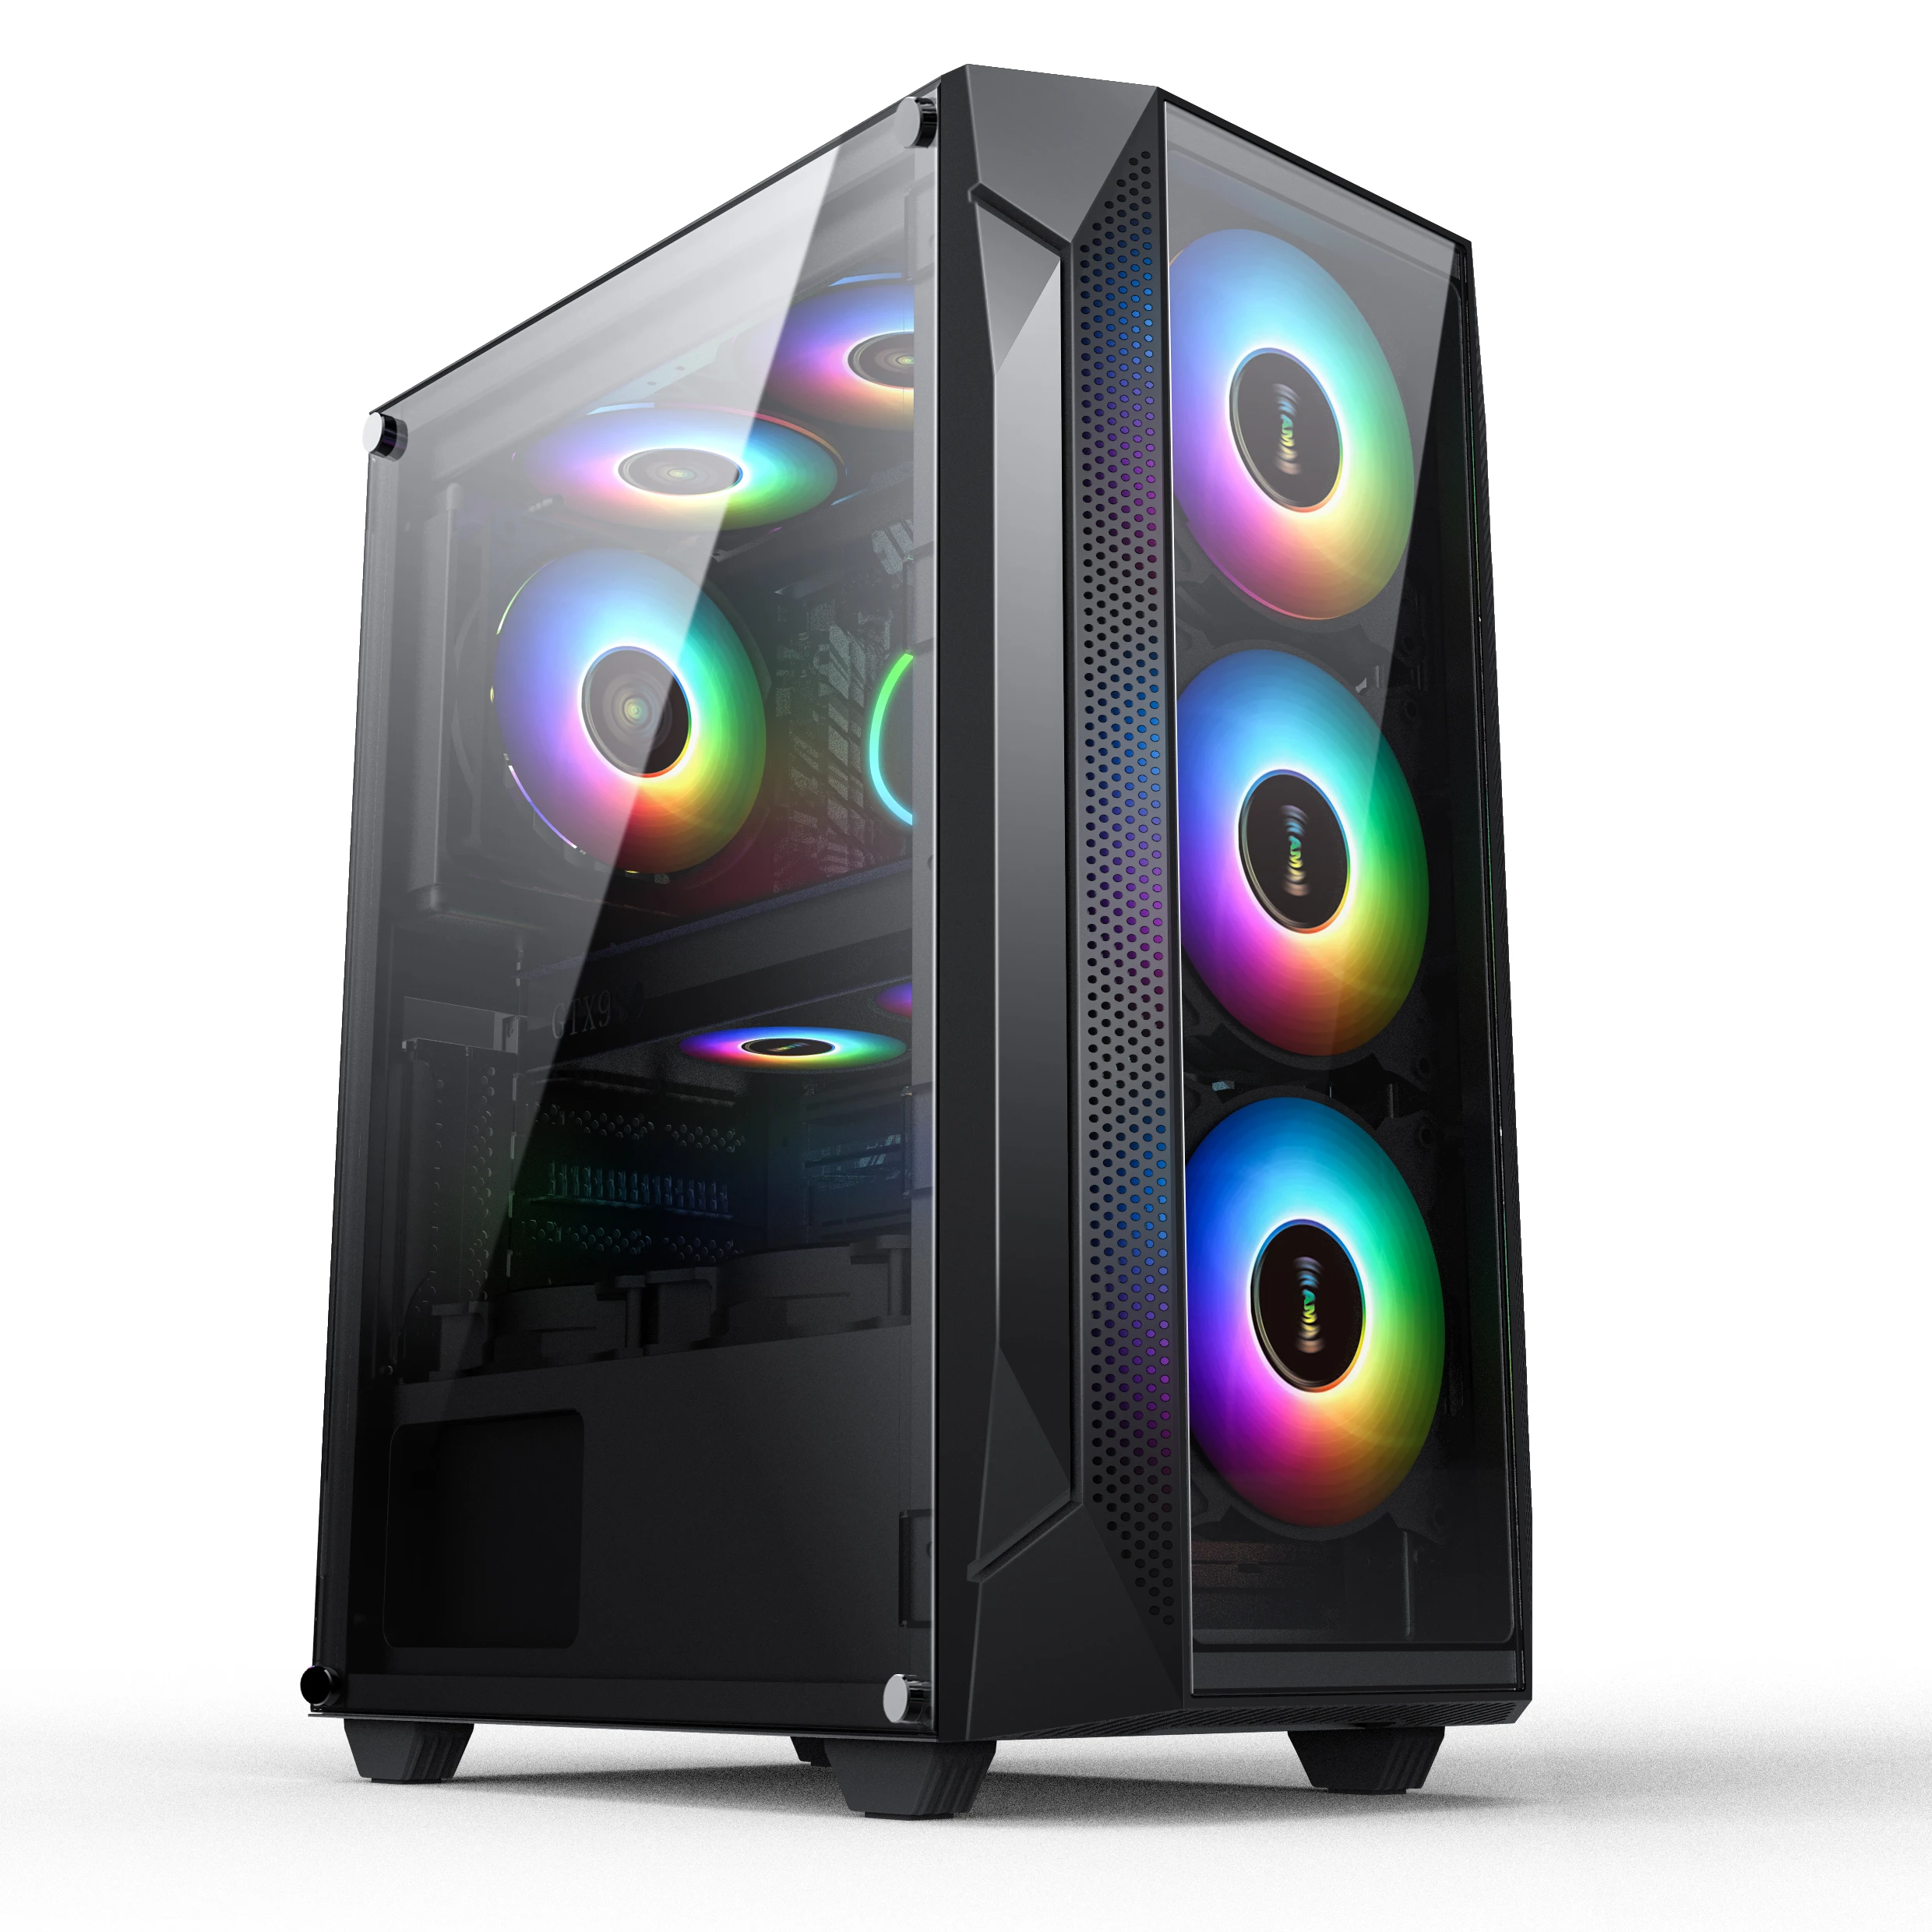 

Brand New Gaming PC Core i9 9900k XEON E5 RTX 2060 710GT 16GB DDR4 Water Cooling Gaming Desktop, Black